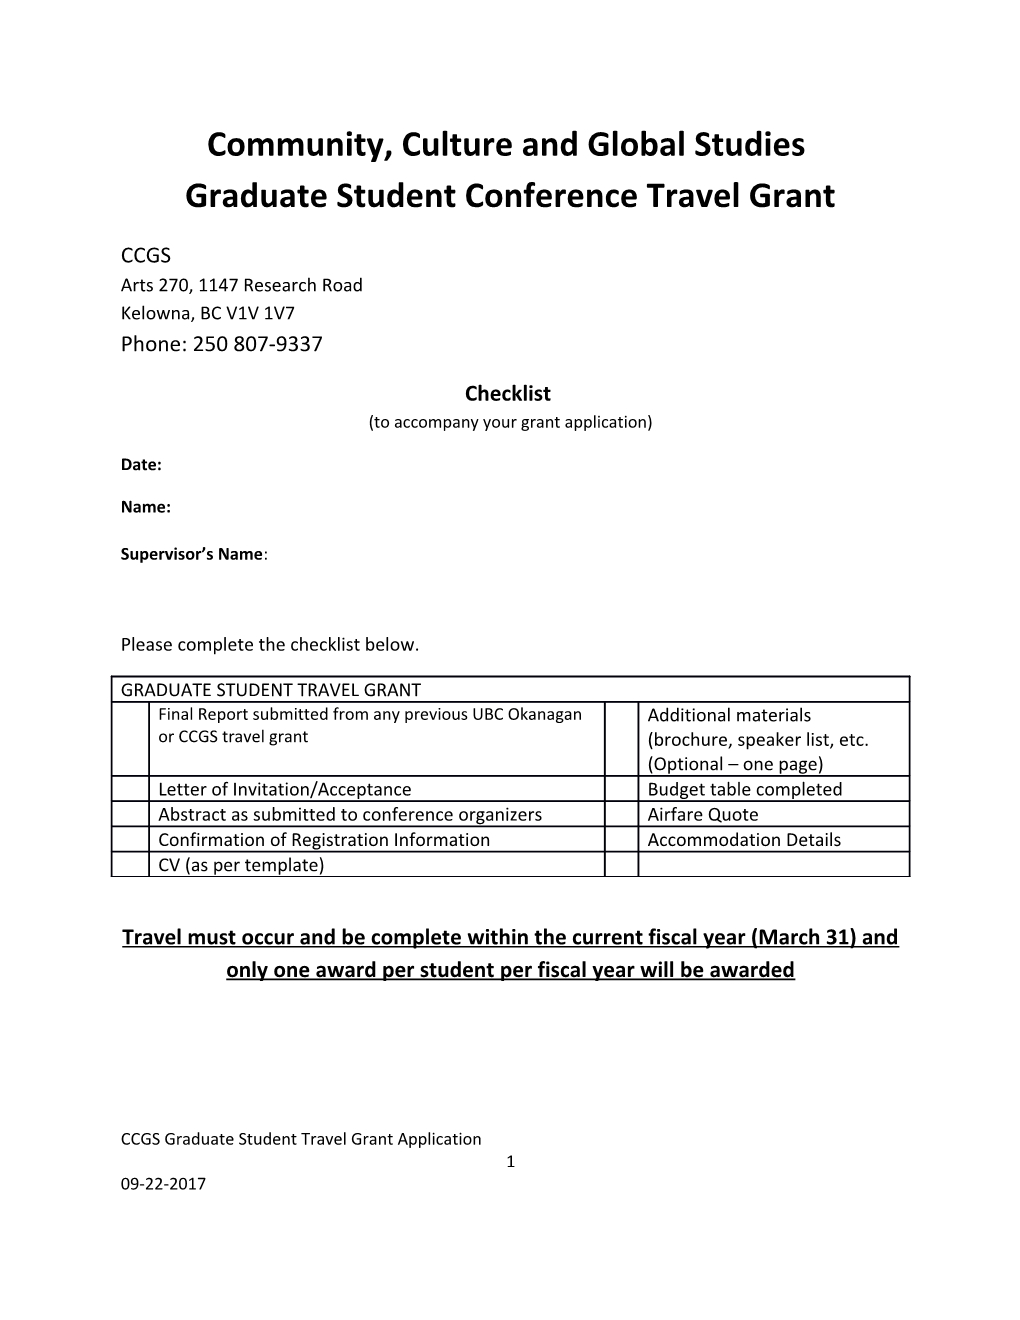 Community, Culture and Global Studies Graduate Student Conference Travel Grant